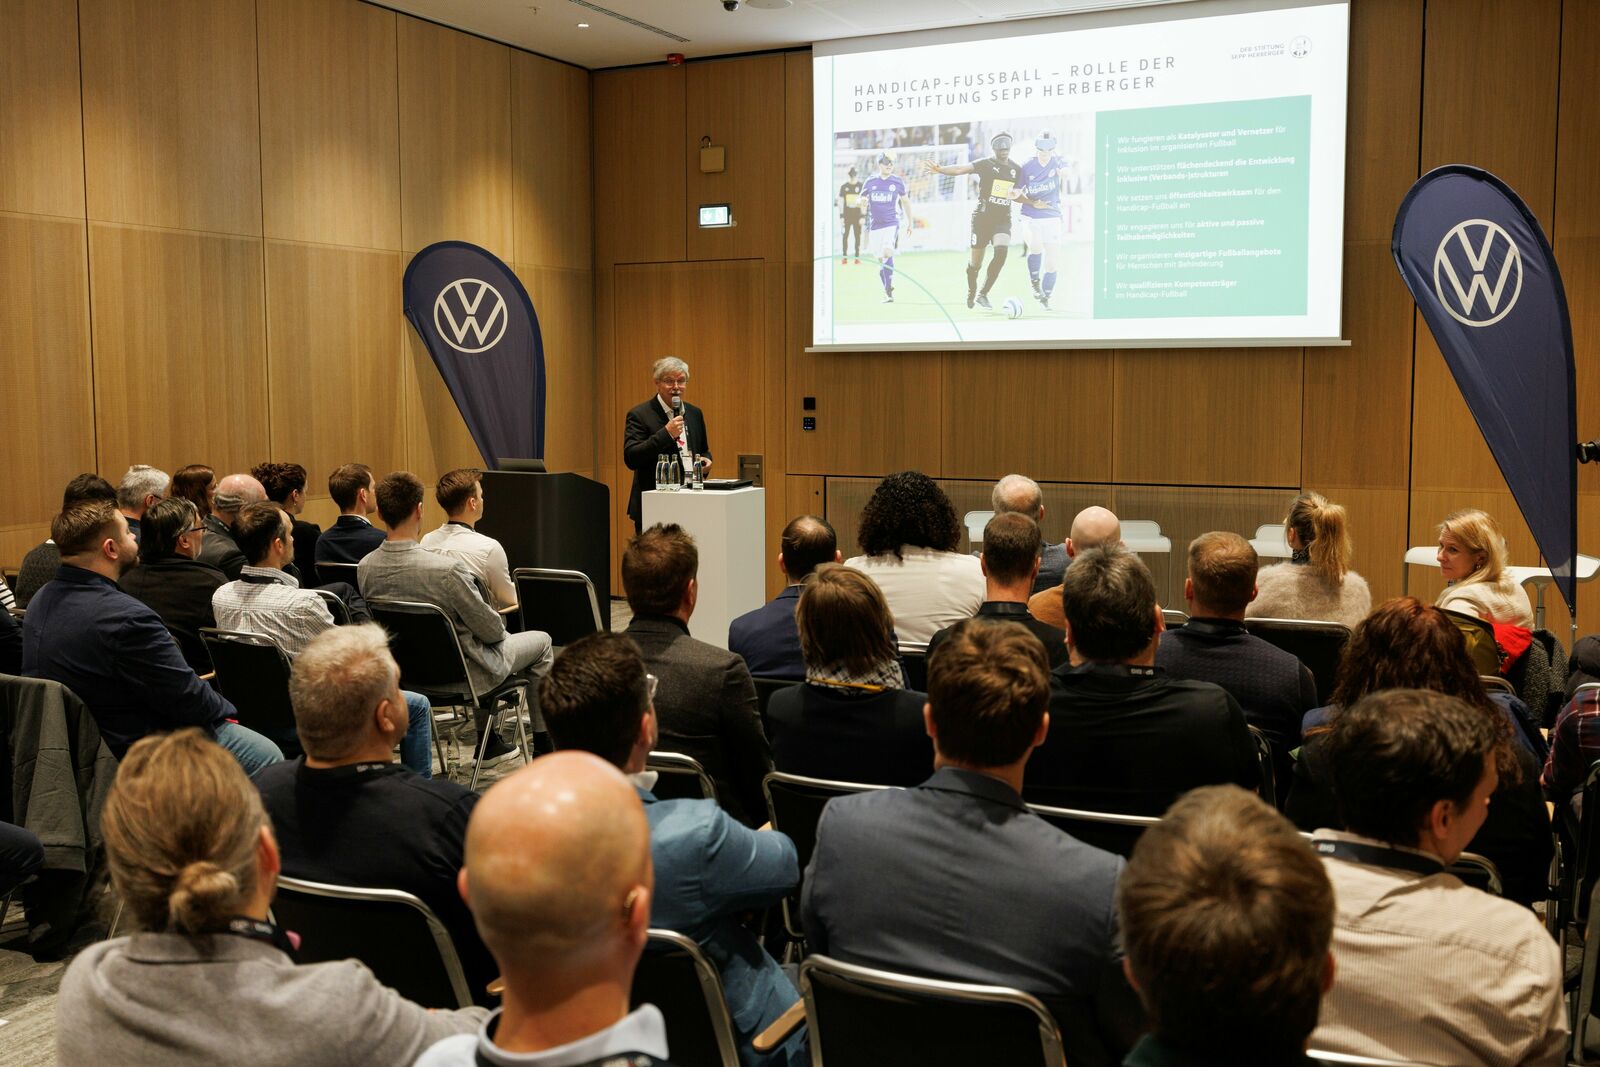 Volkswagen and DFB at SPOBIS: How inclusion can succeed in organised football